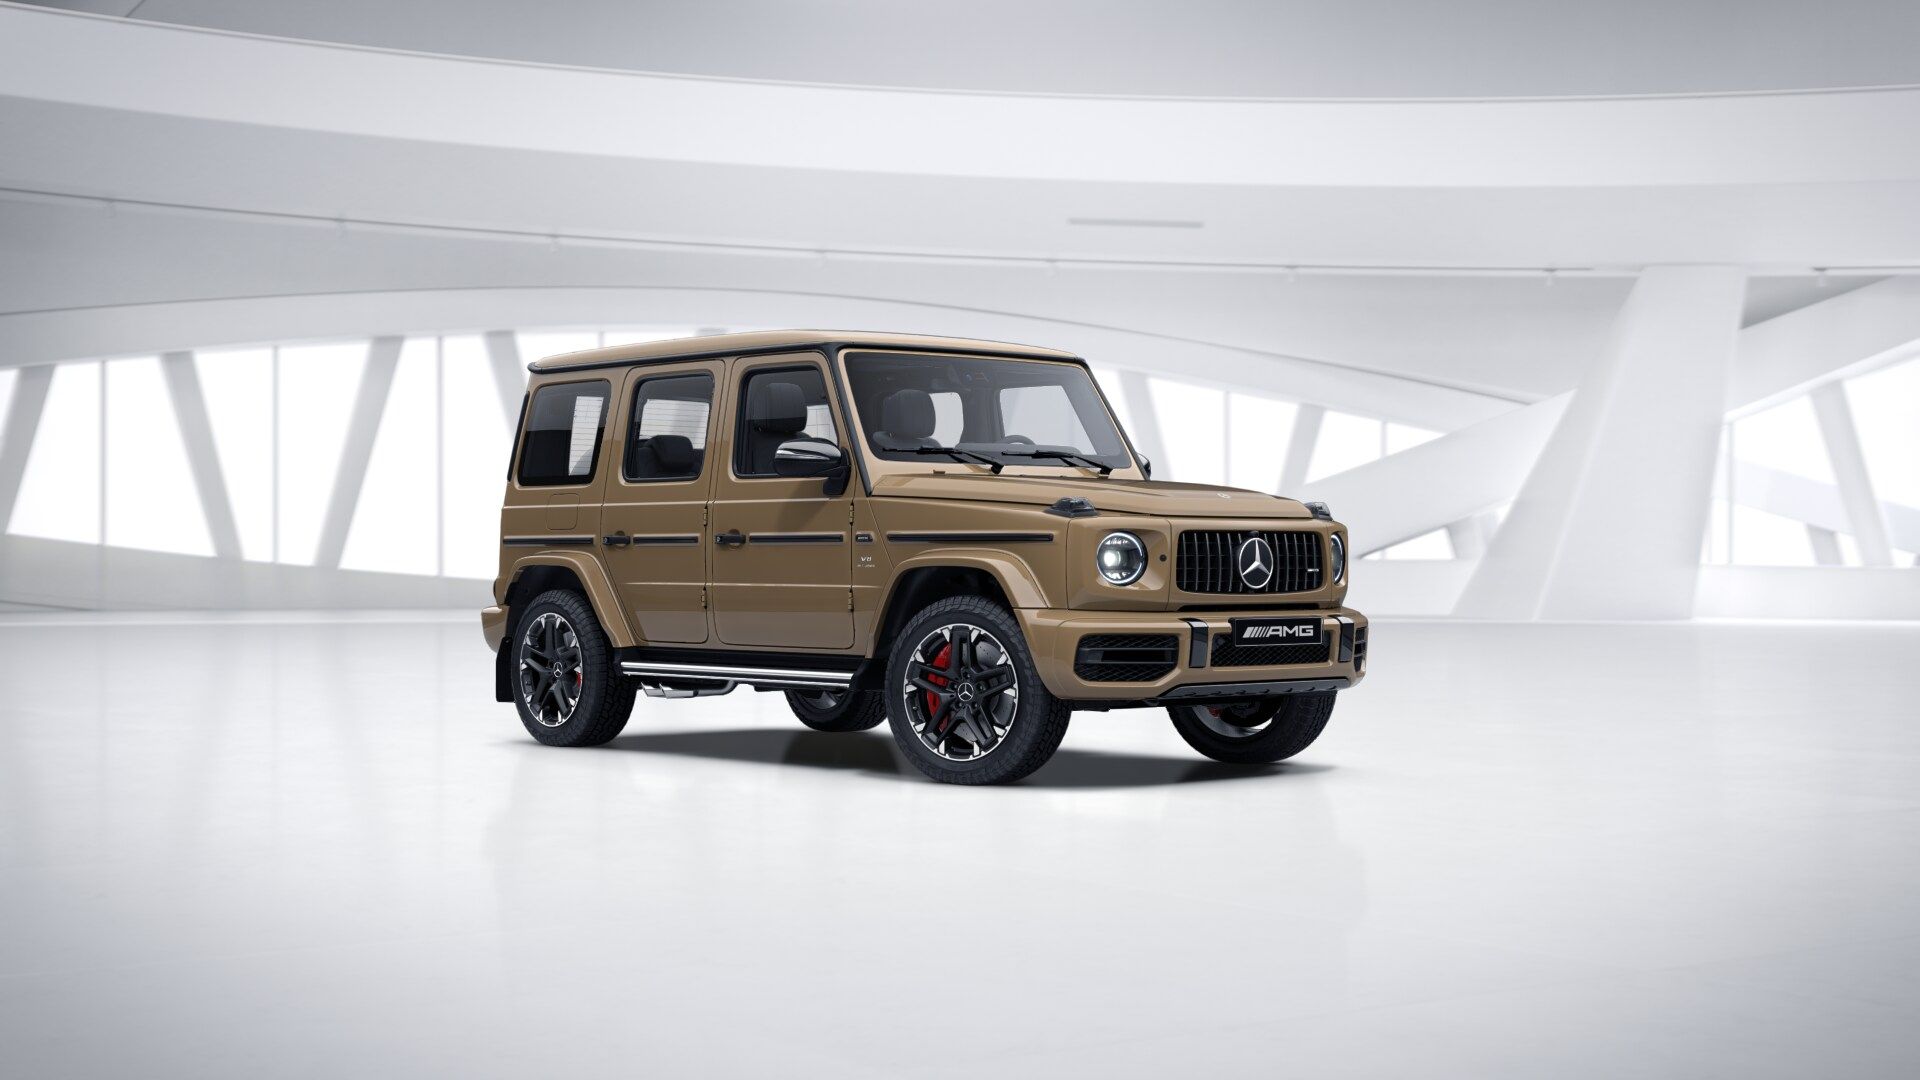 Mercedes Amg G63 Gets New Trail Package With All Terrain Tires